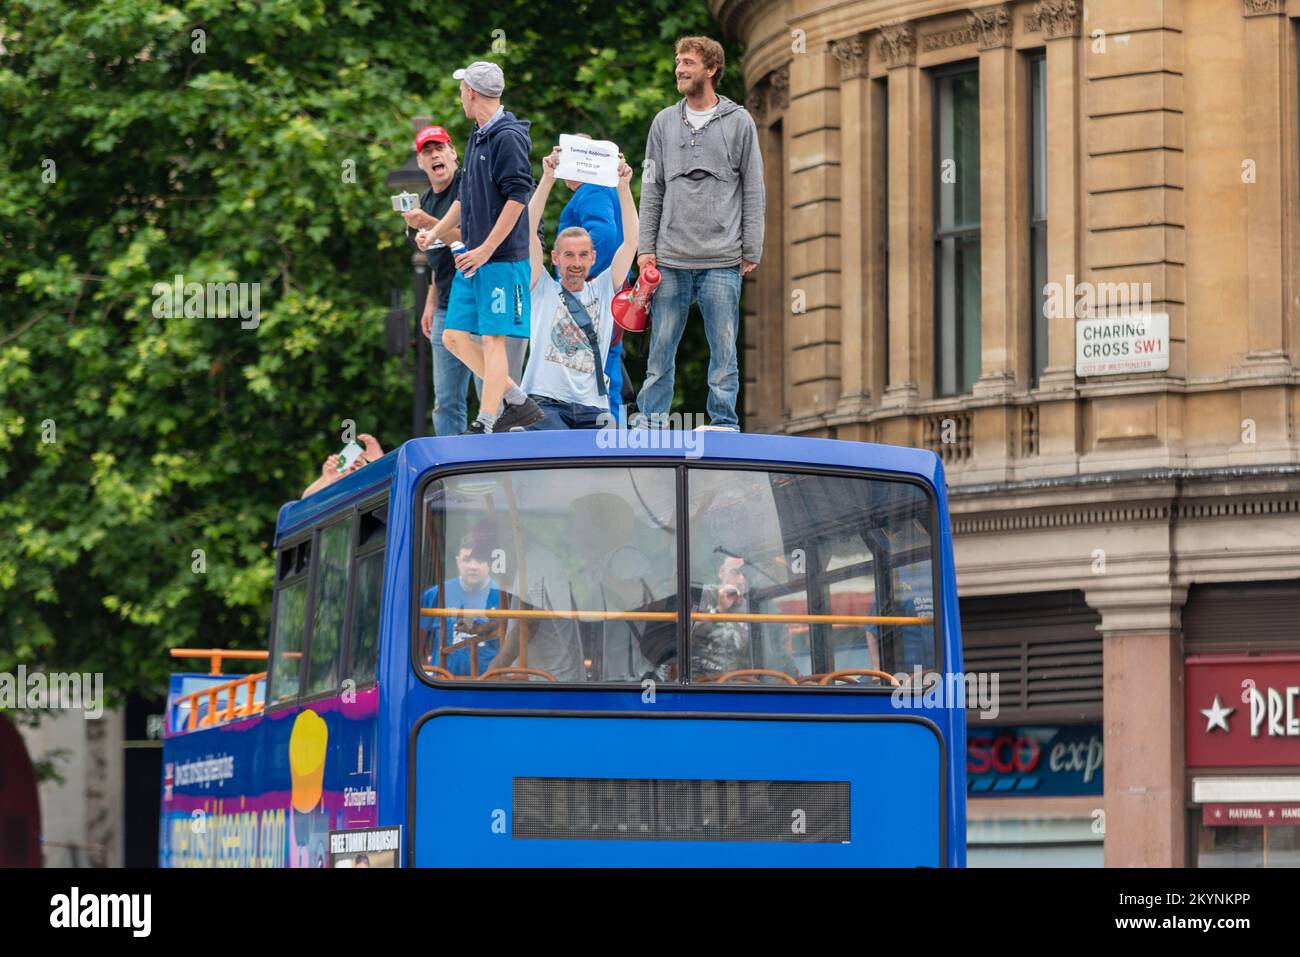 Supporters of Tommy Robinson, such as the EDL protested in London demonstrating for his release after arrest. Protesters climbed up onto tour bus roof Stock Photo